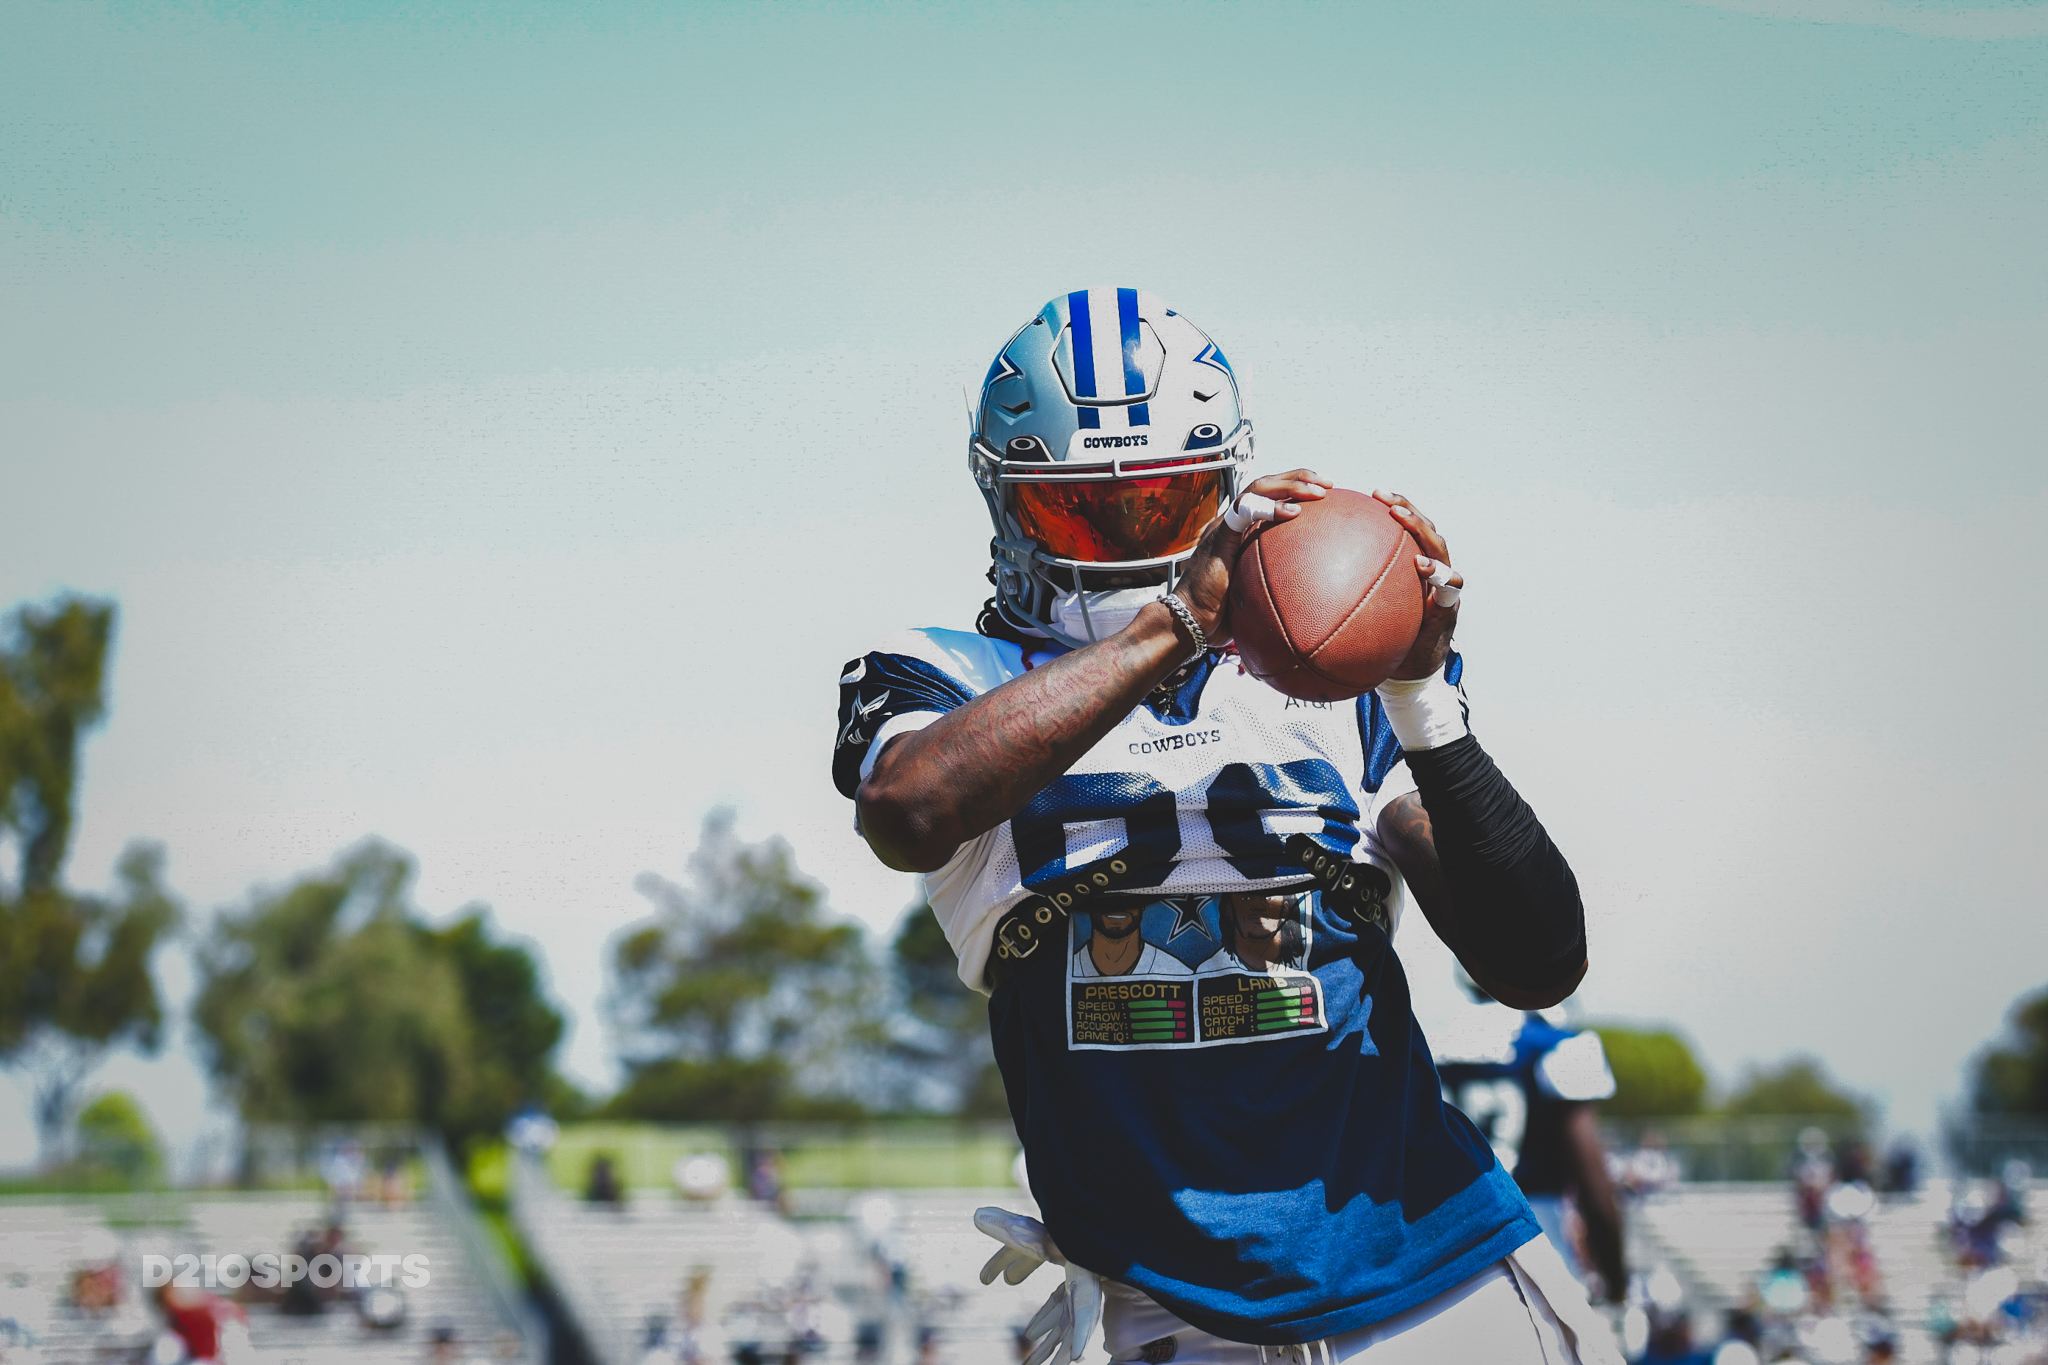 Dallas Cowboys Training Camp Day 6: Offense Looks Explosive - D210SPORTS